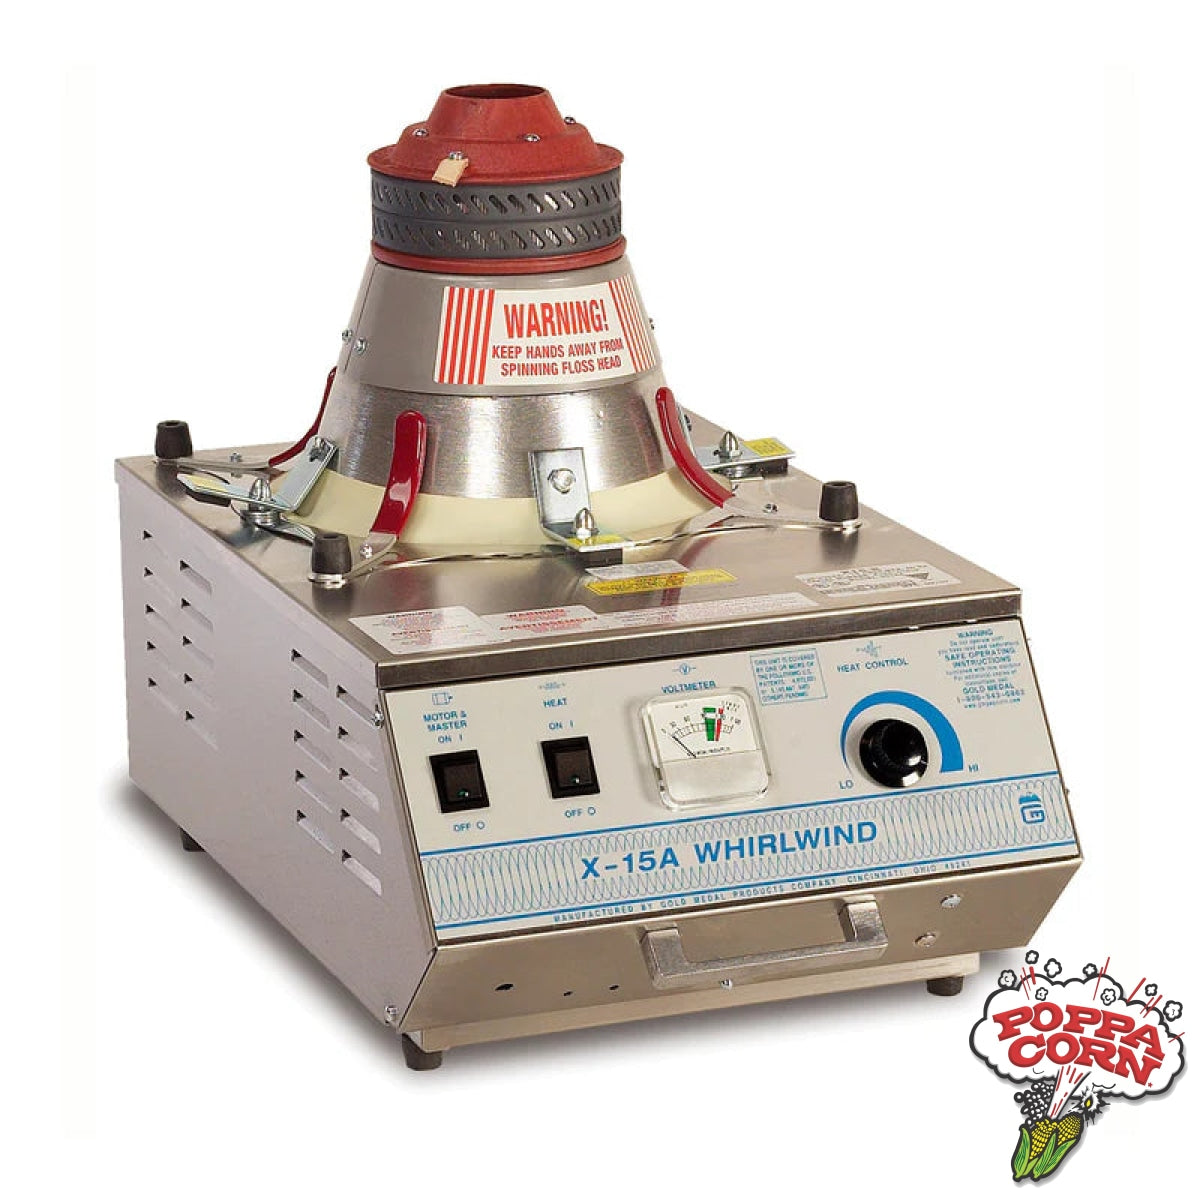 X-15A Stainless Steel Whirlwind® Cotton Candy Machine - GM3015A - Poppa Corn Corp